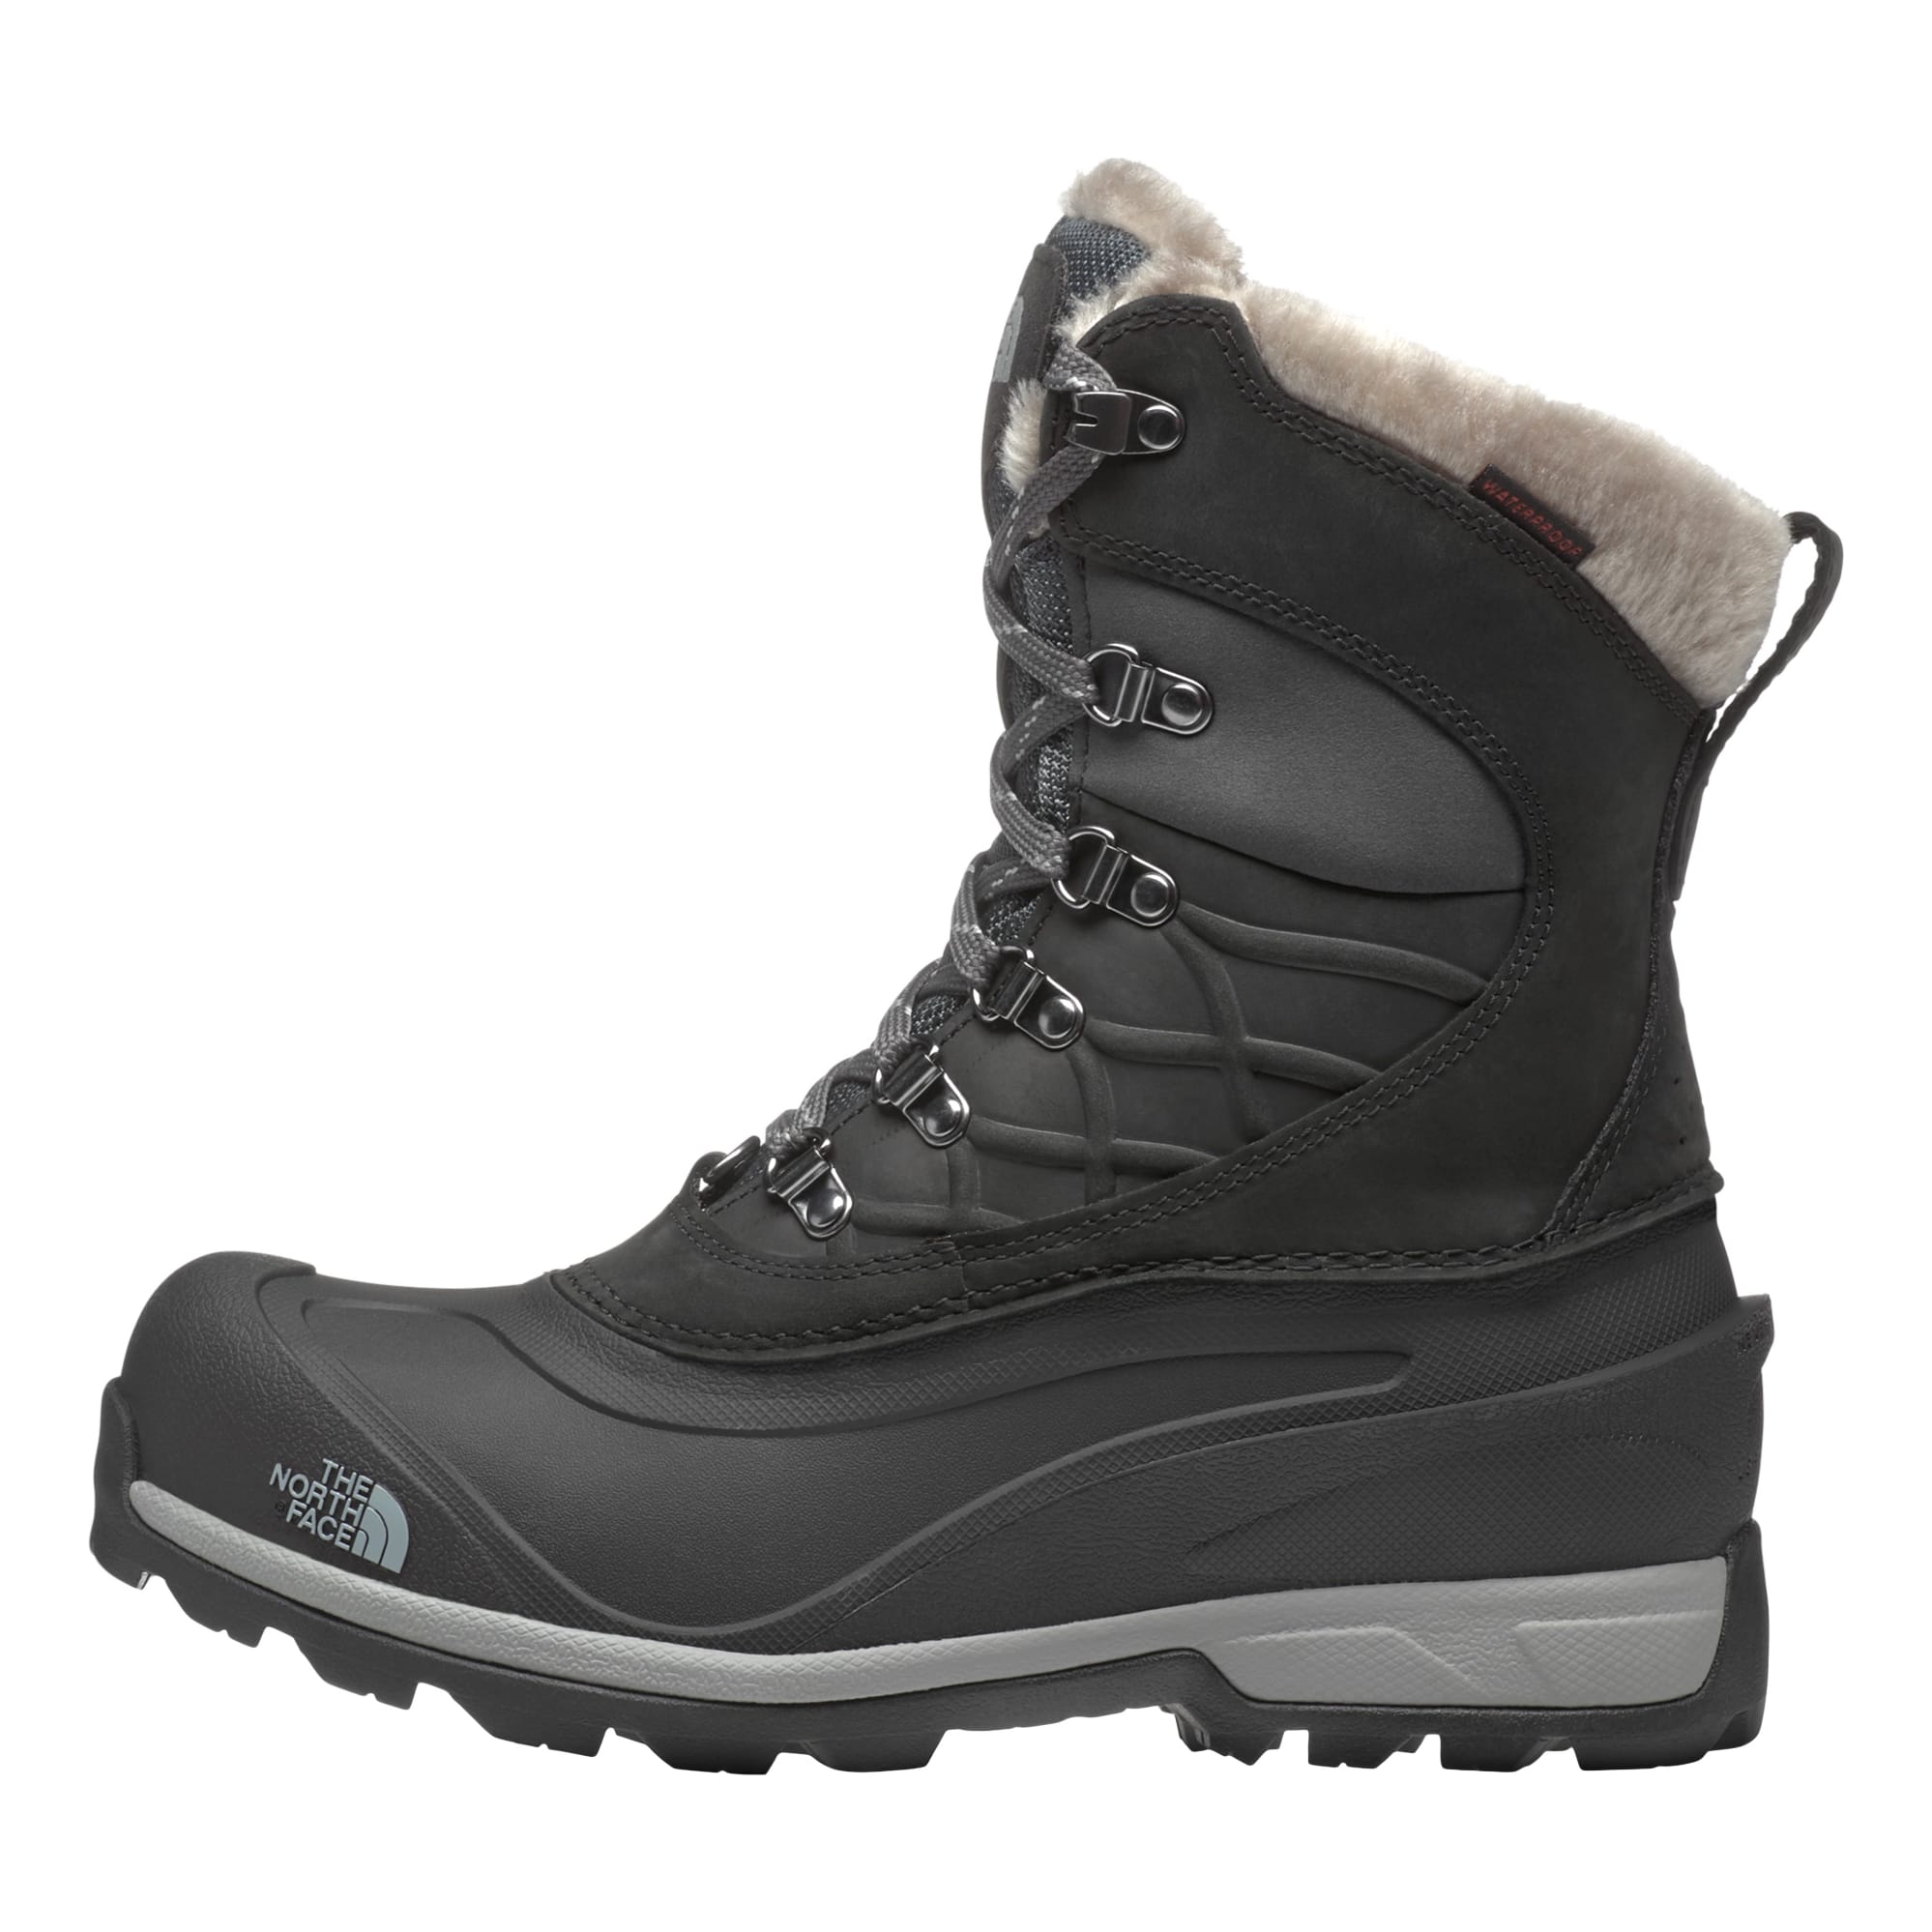 The North Face® Women’s Chilkat 400 Winter Boot